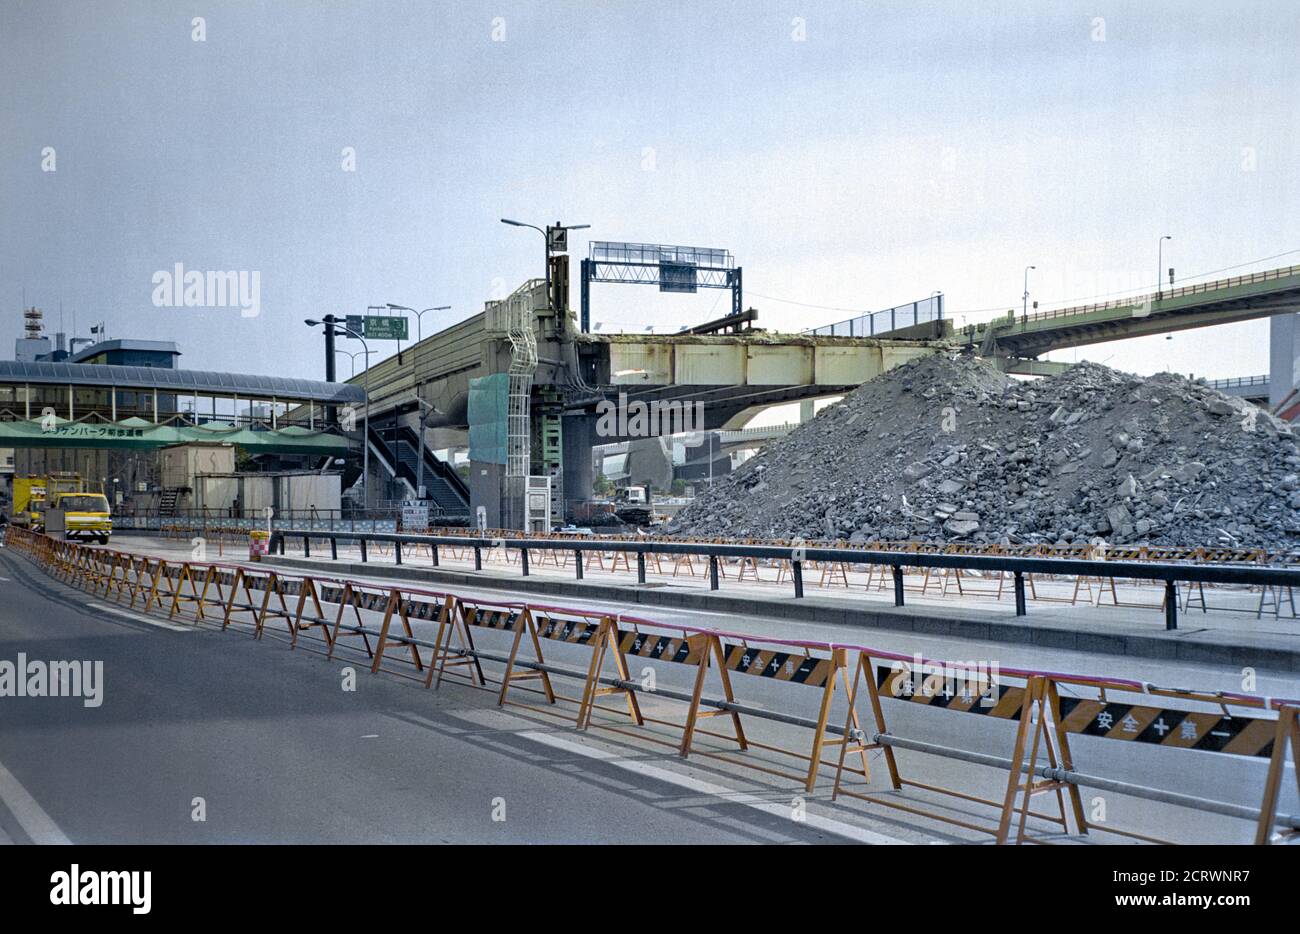 Collapsed highway overpass from the damage caused by the 1995 Great Hanshin Earthquake in Kobe, Japan Stock Photo